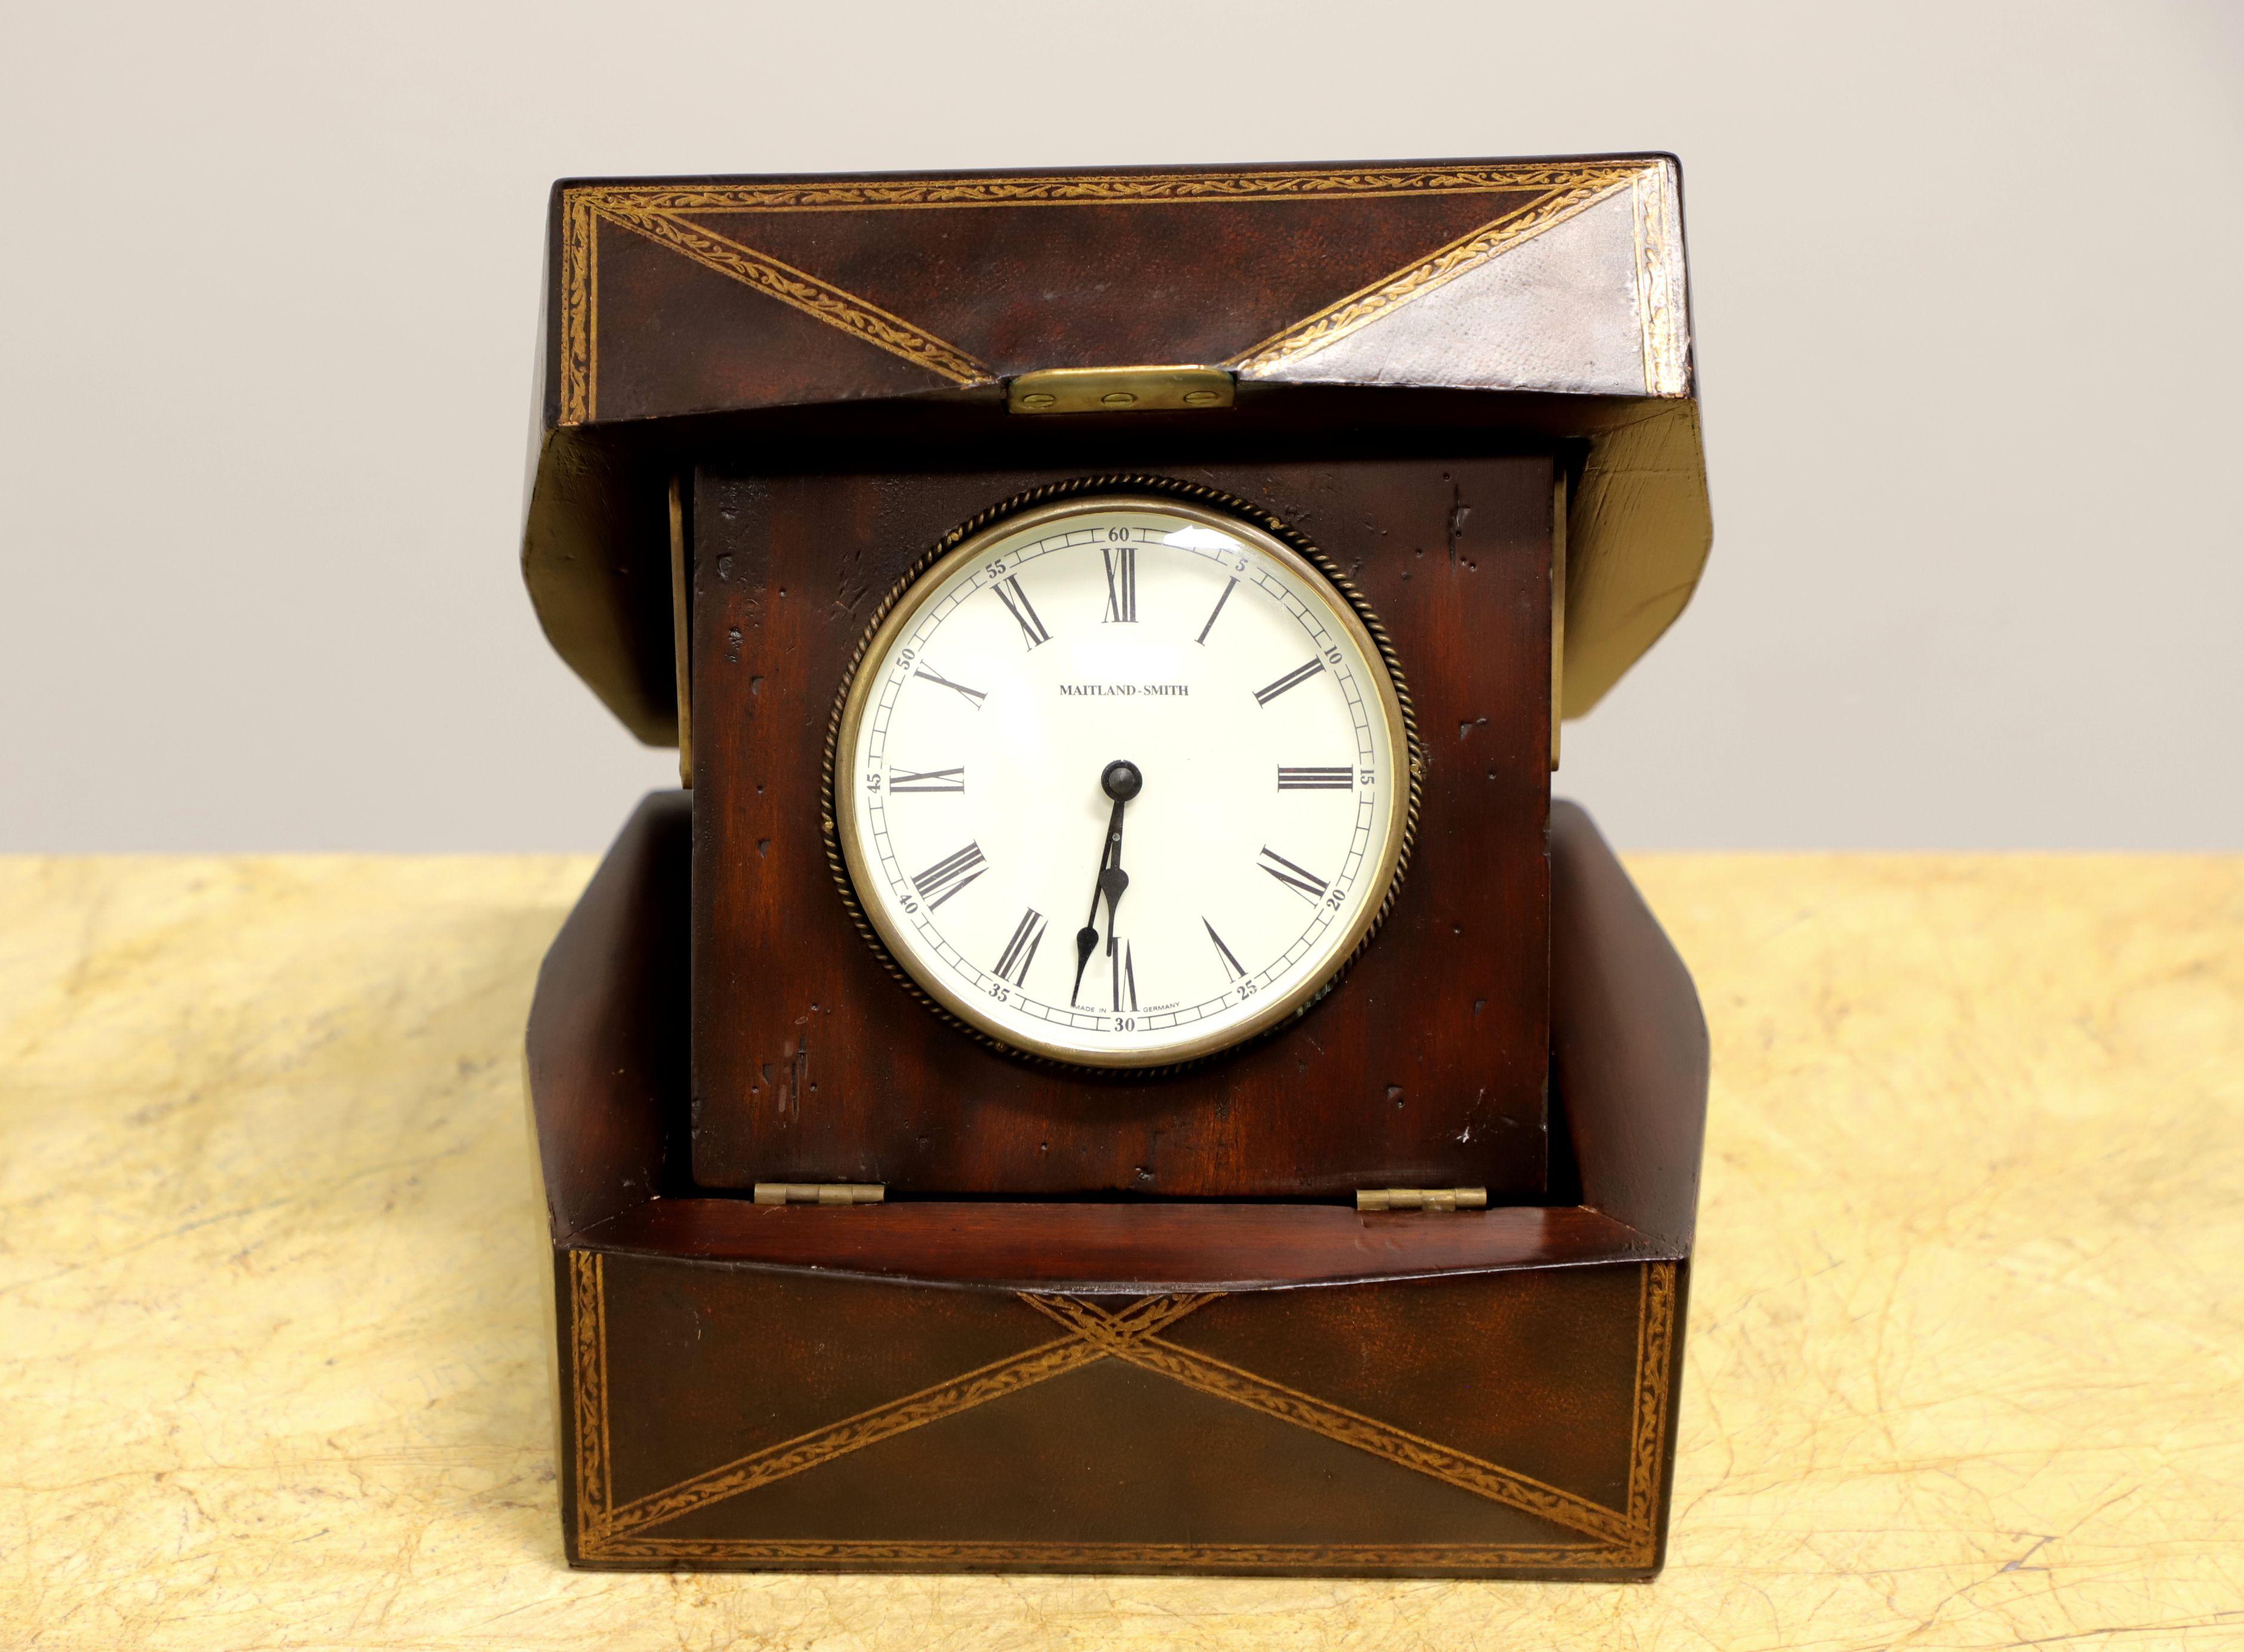 A decorative desk top clock in a leather clad box by Maitland Smith. Mahogany box, leather clad and gold embossed. German made, battery operated, clock set into mahogany on hinges to face prominently when box is opened. Round glass covered clock